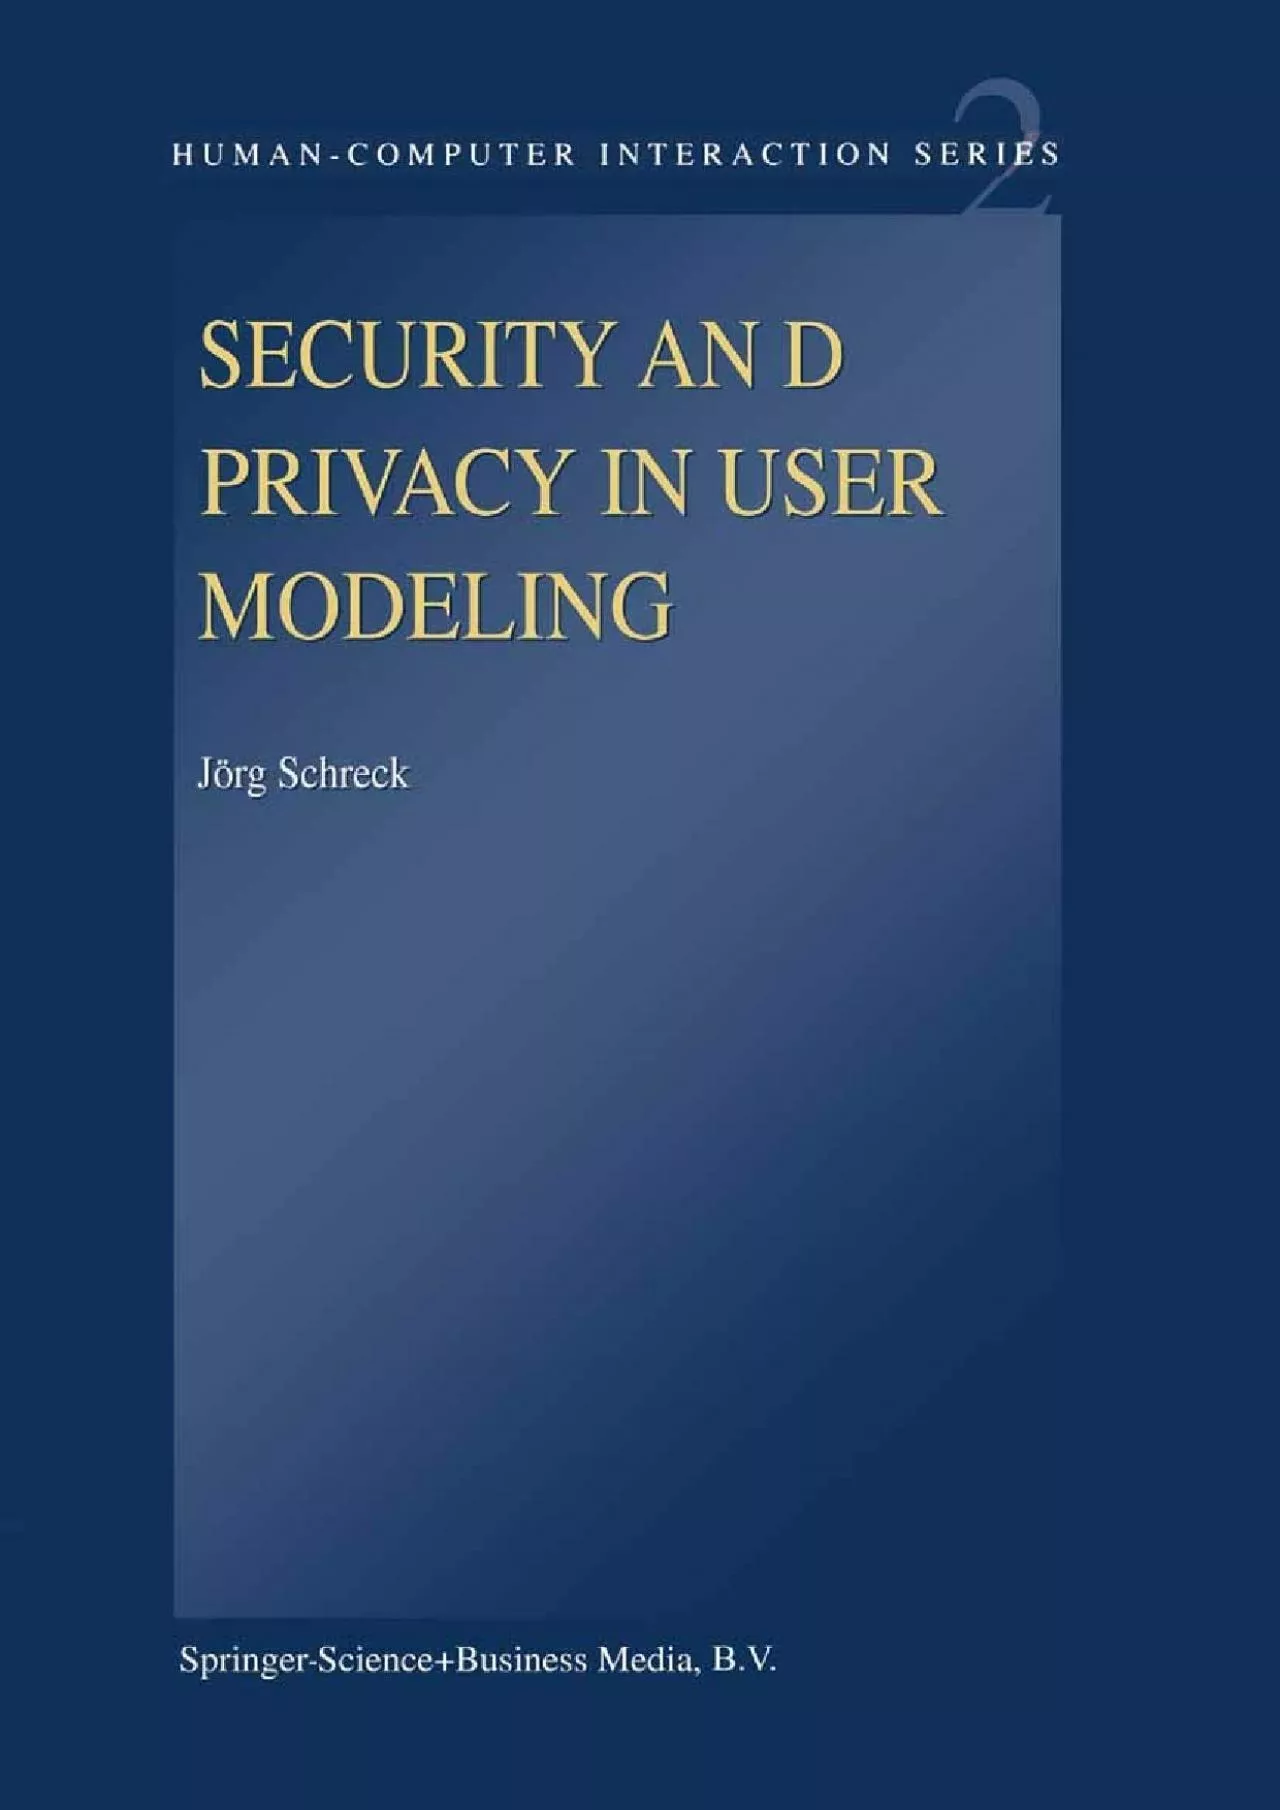 (DOWNLOAD)-Security and Privacy in User Modeling (Human–Computer Interaction Series